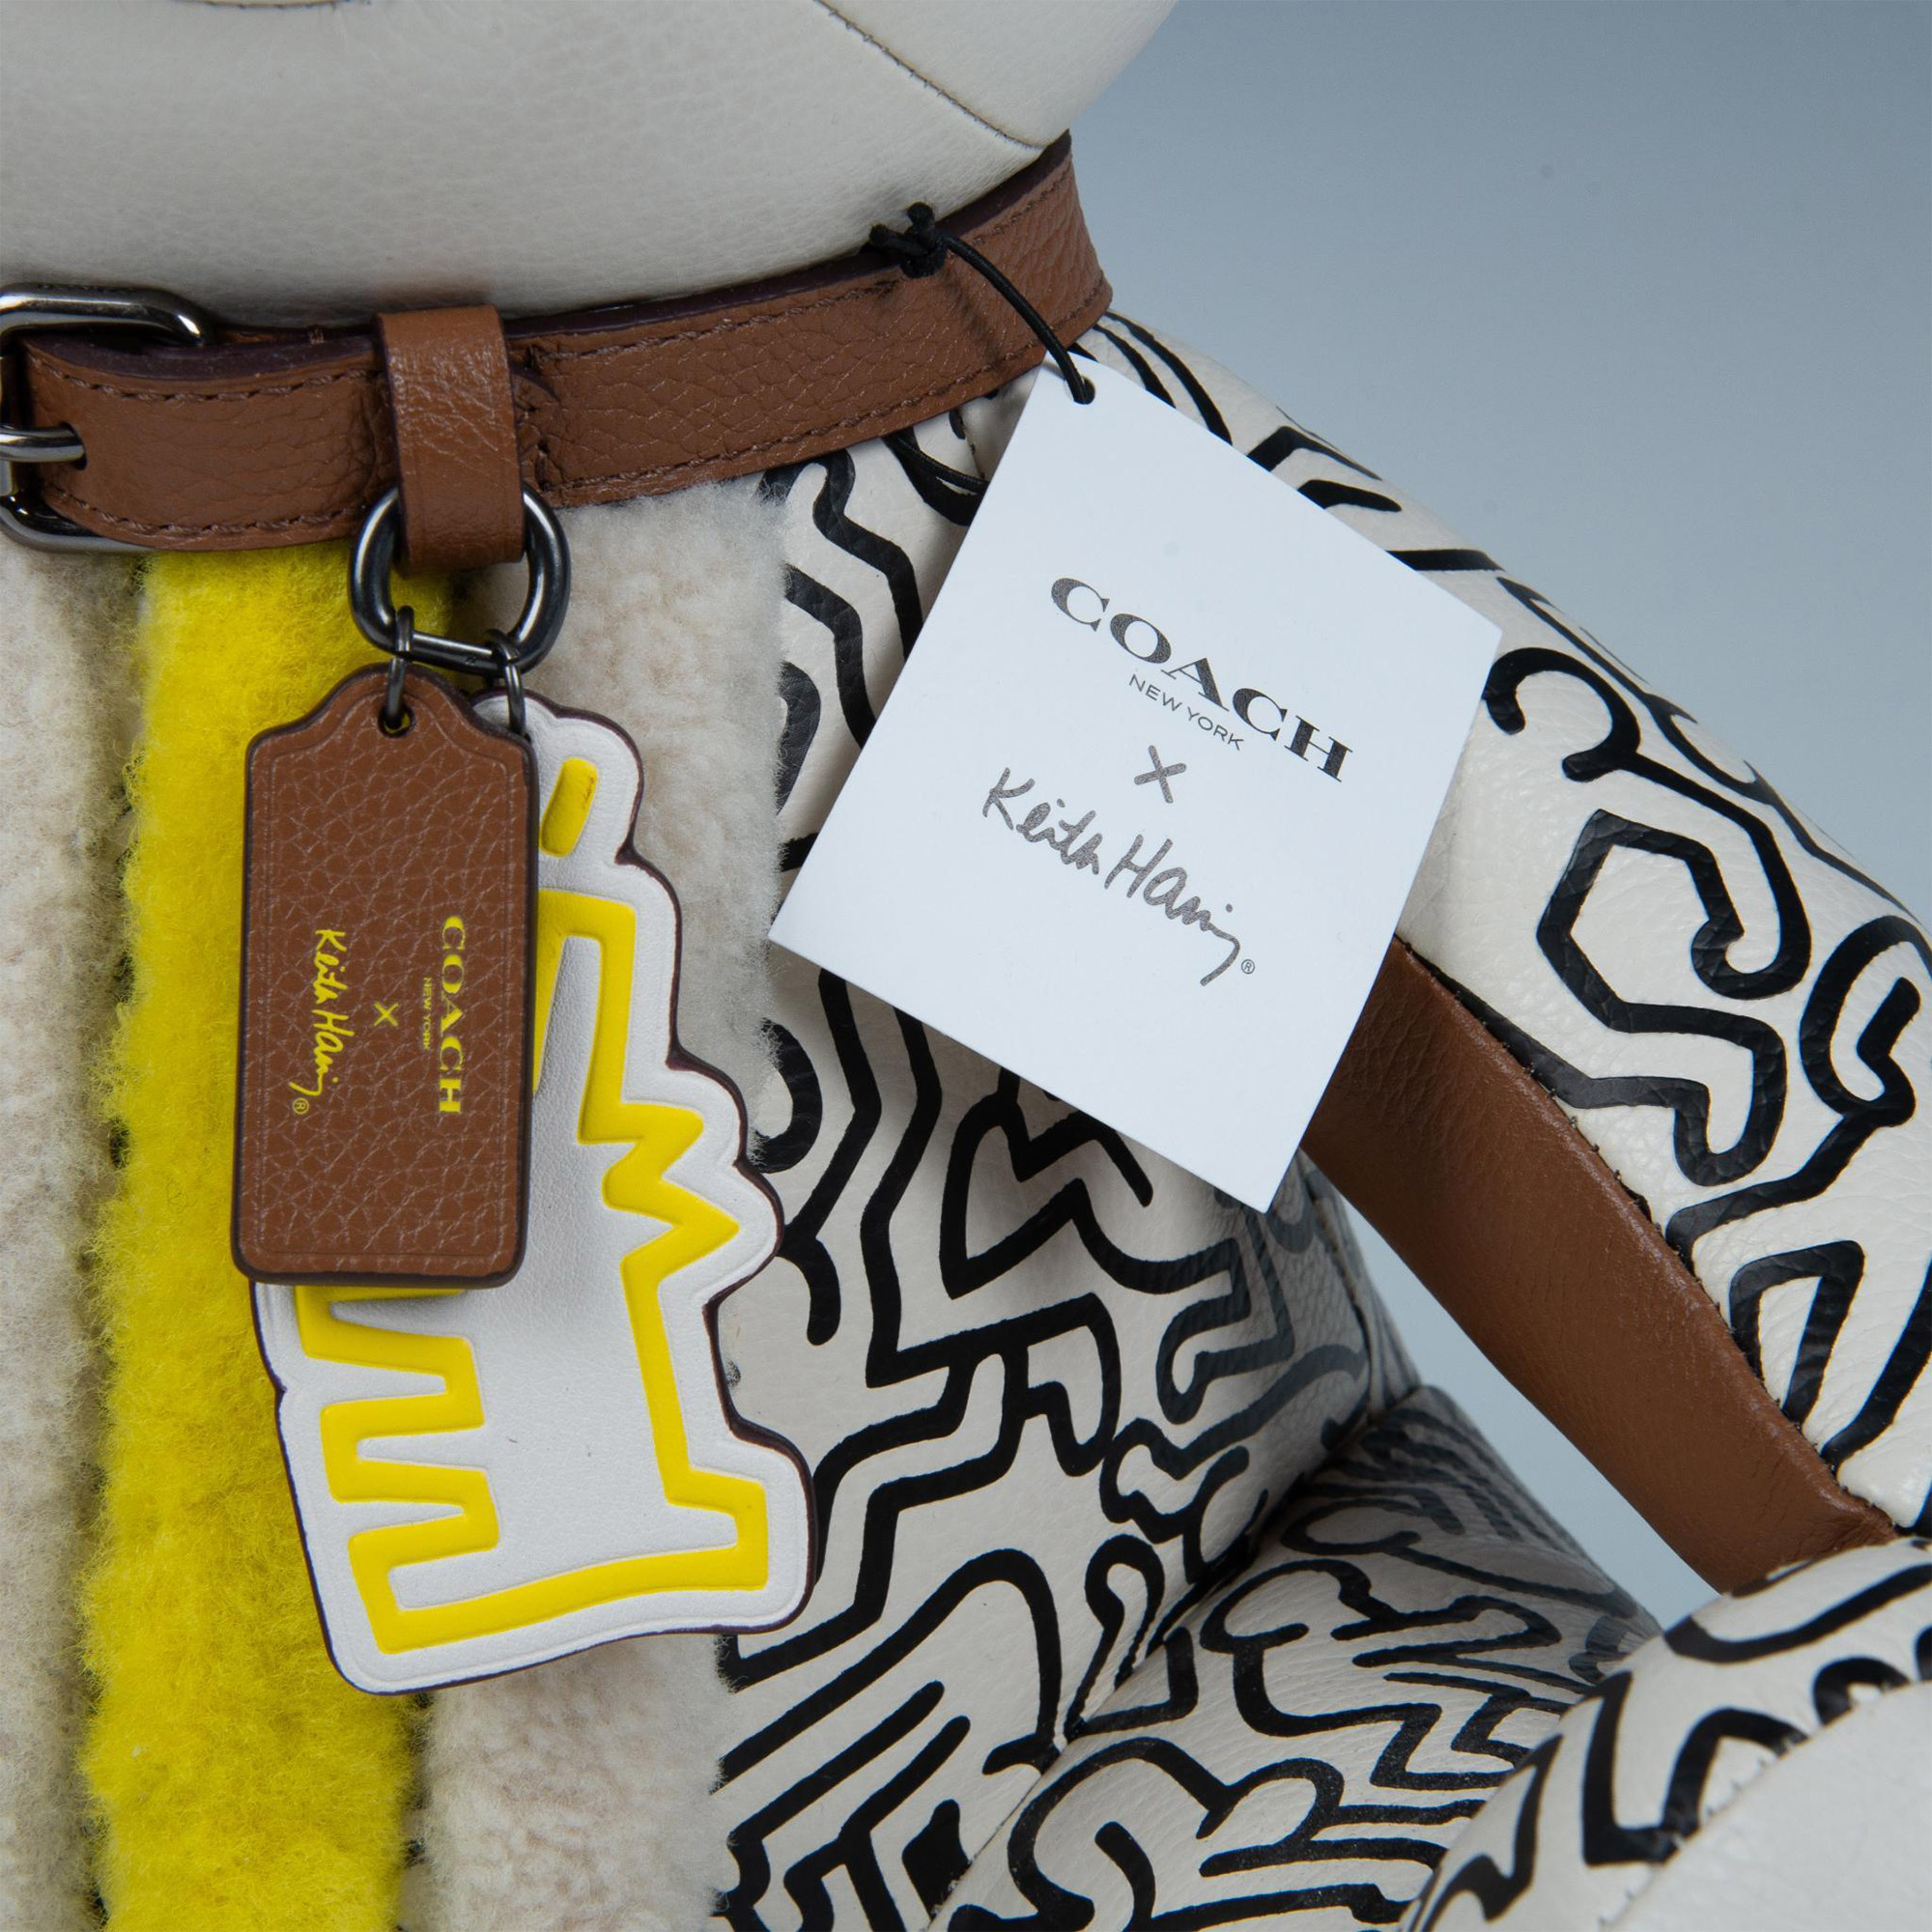 Coach Keith Haring Collaboration Plush Leather Teddy Bear - Image 3 of 8